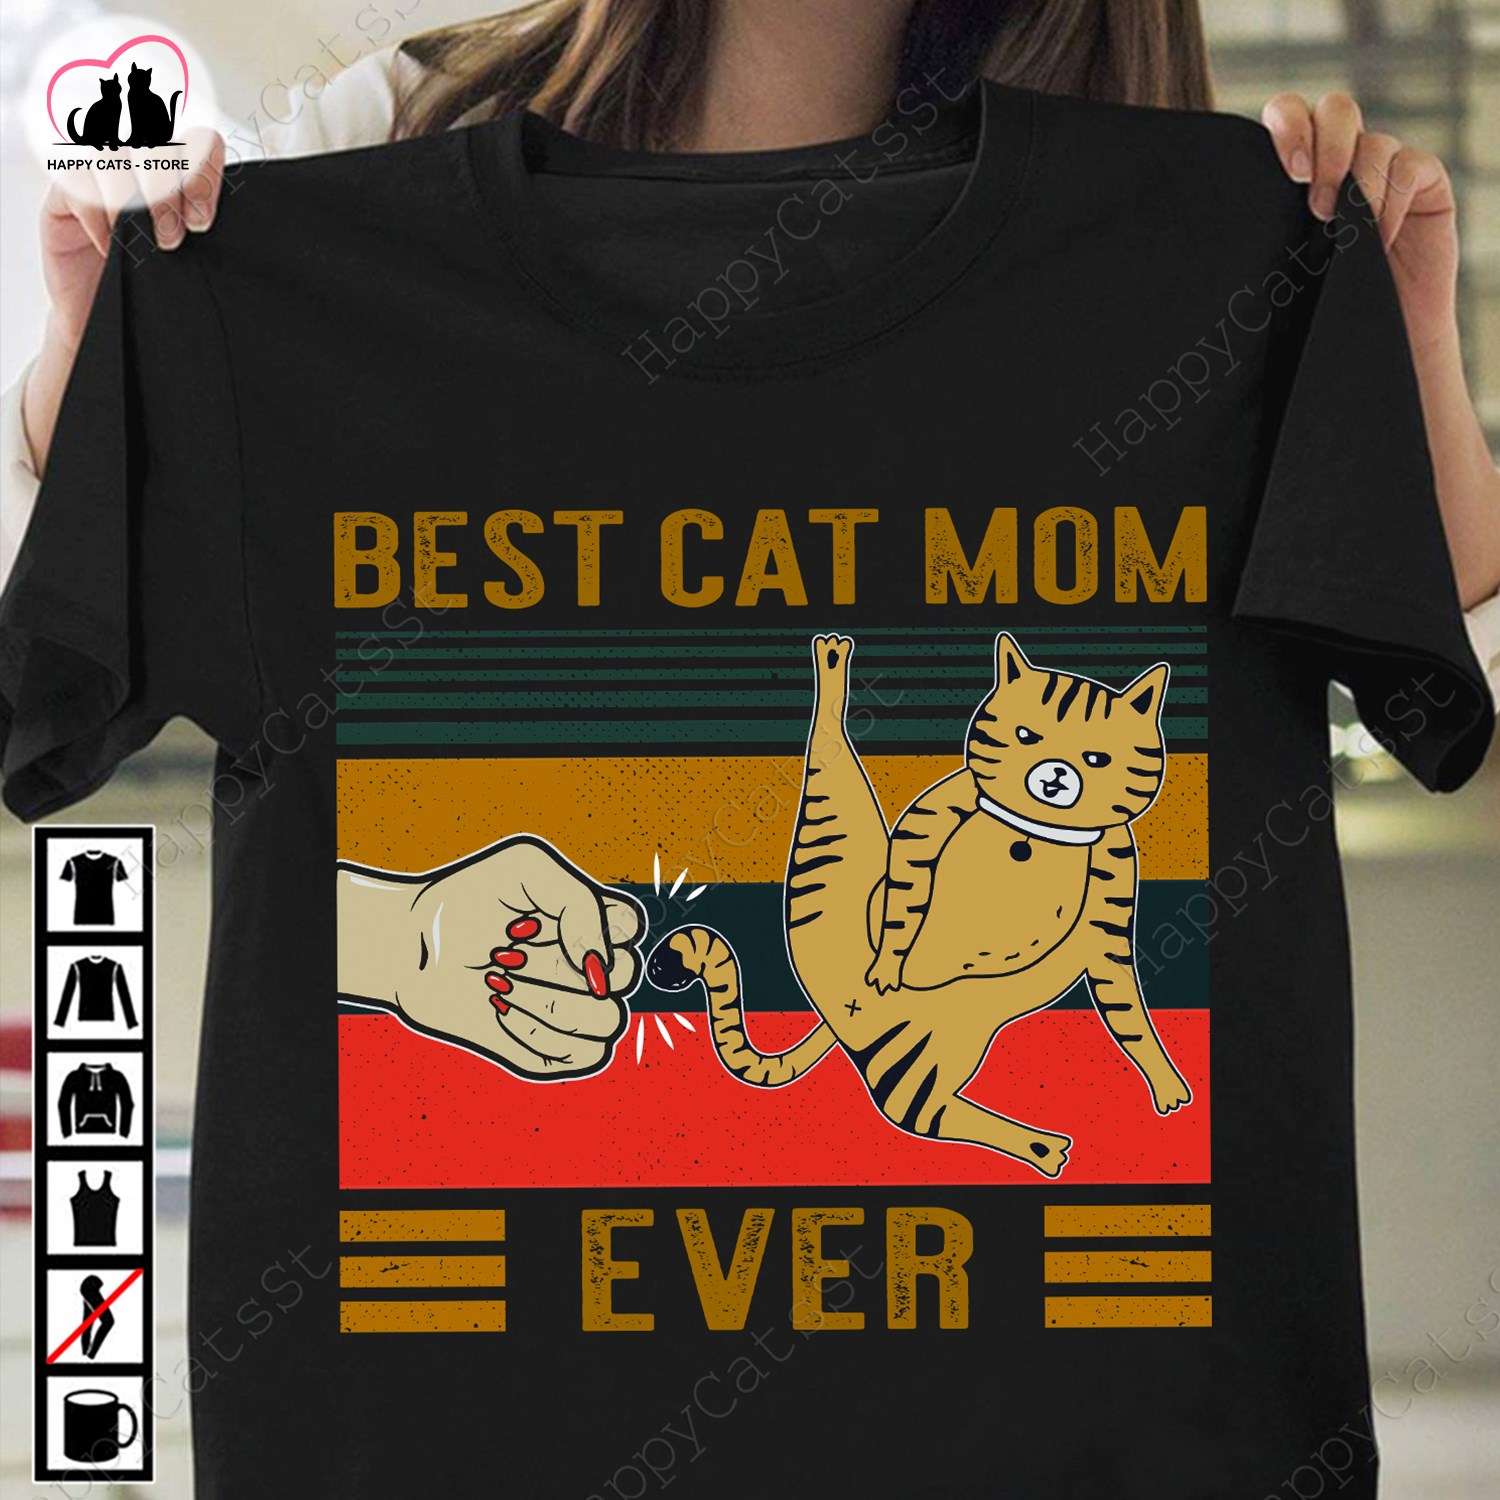 Best cat mom ever - Gift for cat person, naughty cat